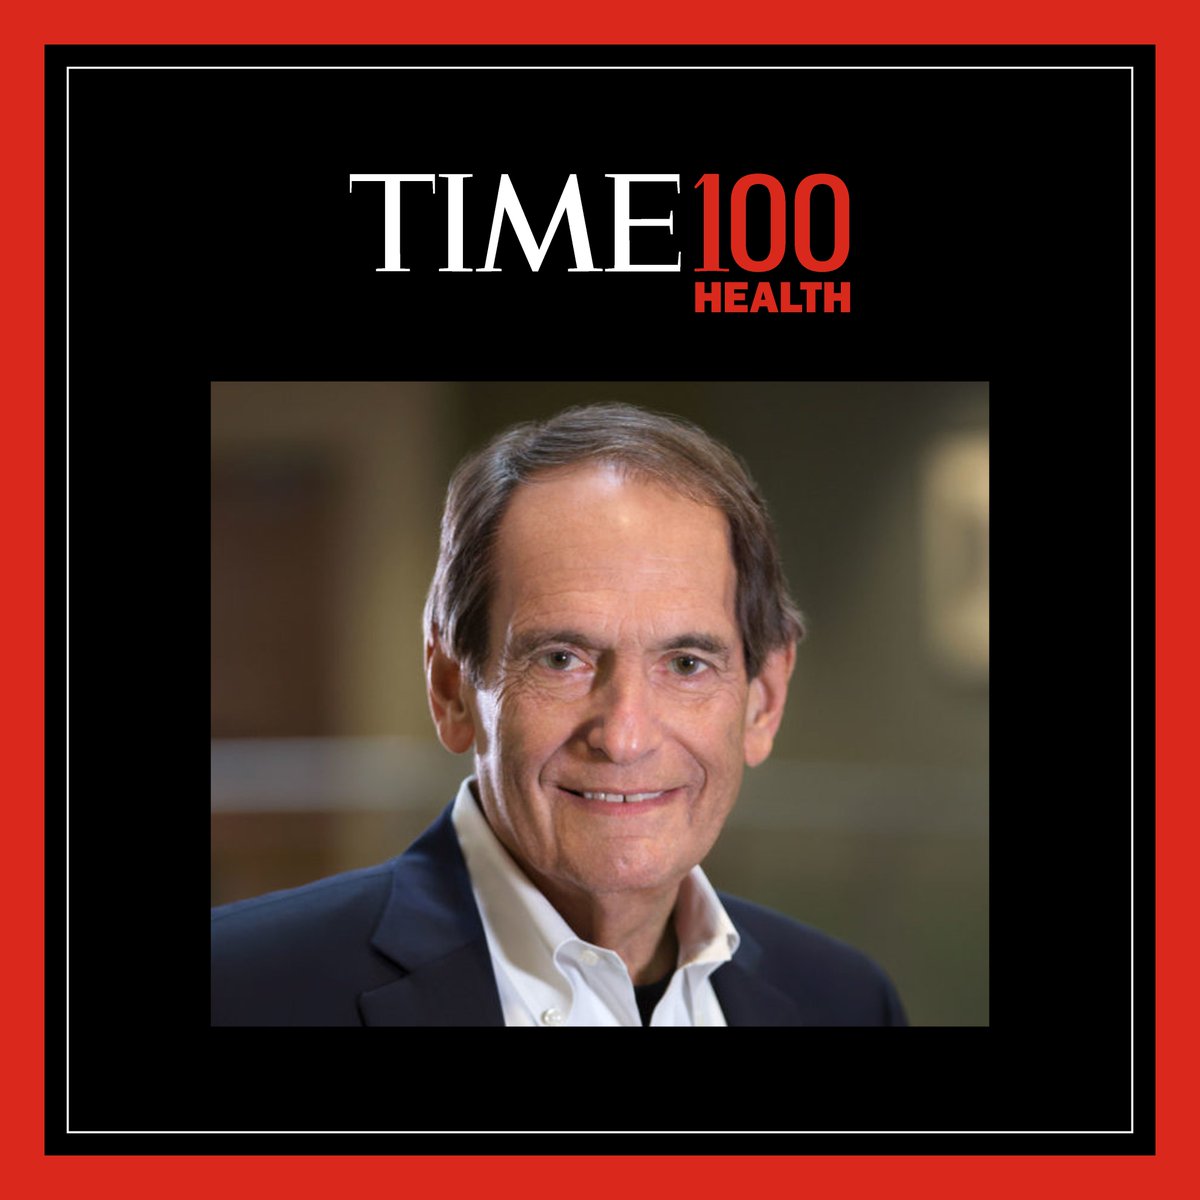 Congratulations to Dr. Jerry Mendell on being named to the inaugural Time100 Health list! The list recognizes individuals who most influenced global health this year, and it is an acknowledgement of Dr. Mendell’s impact, innovation and achievement.